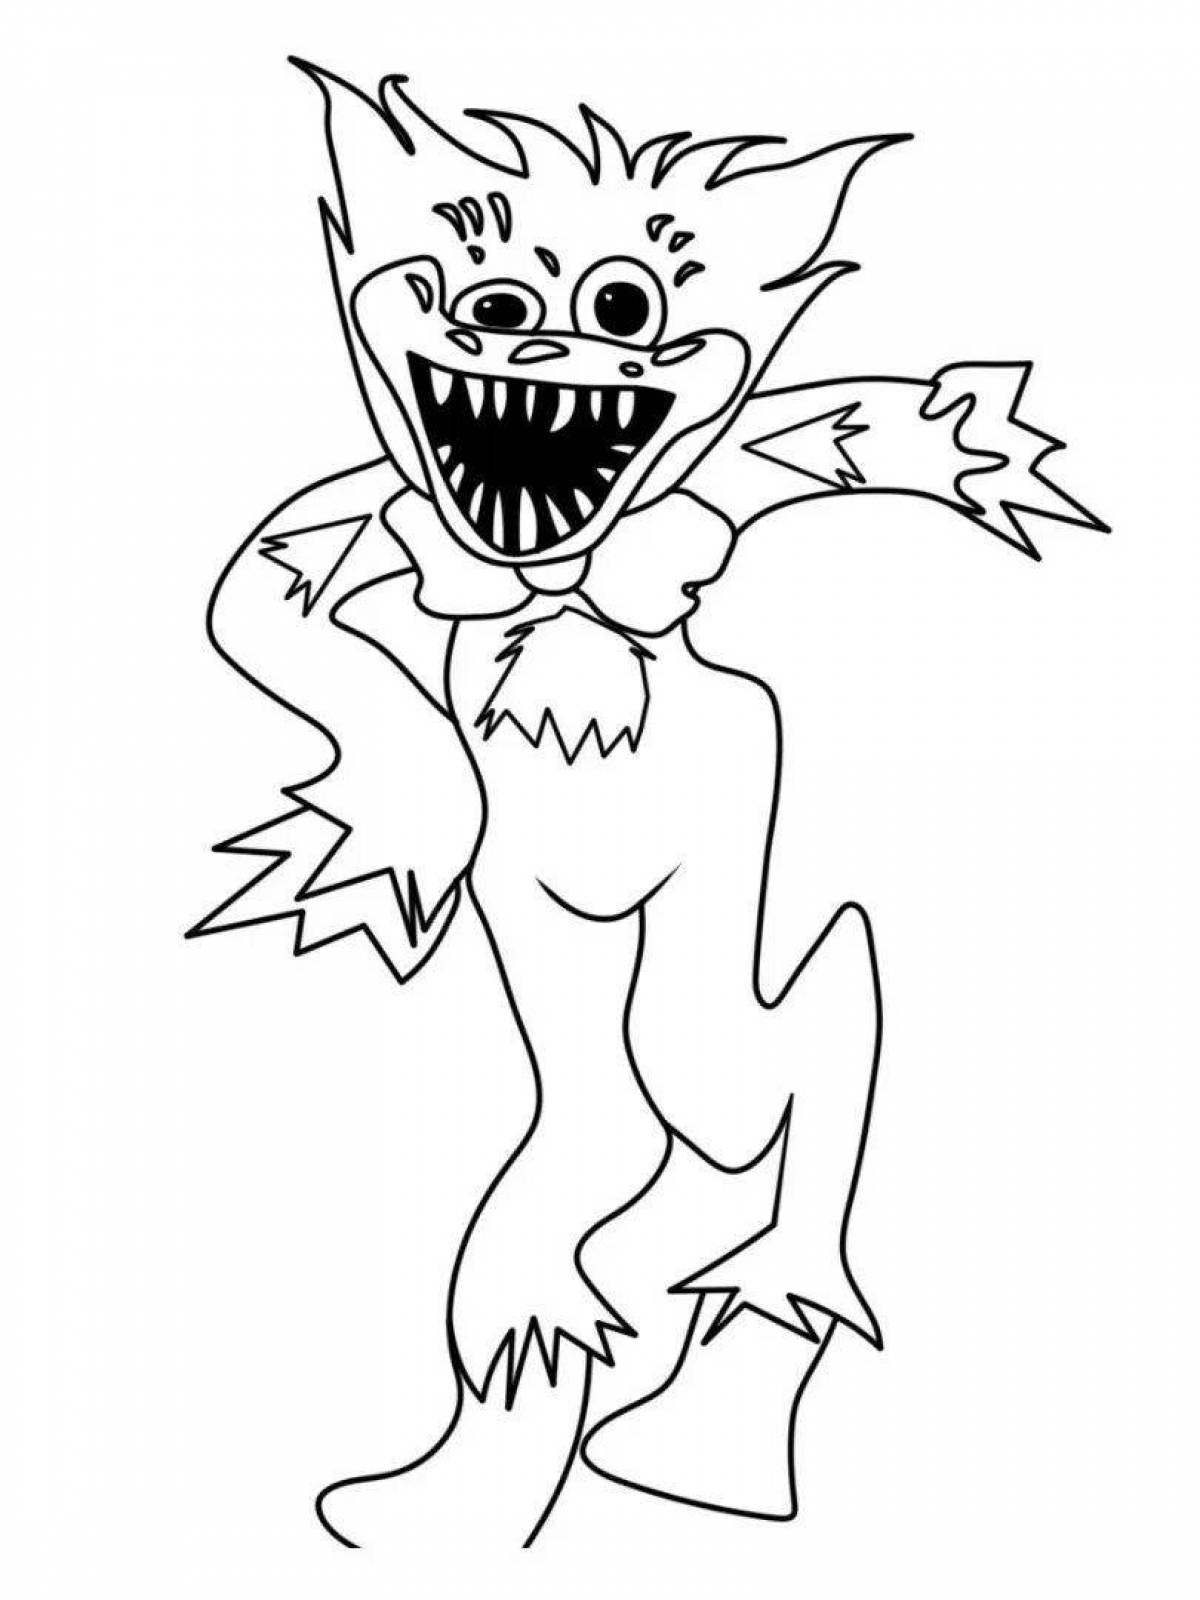 Fun hagivagi monsters coloring page